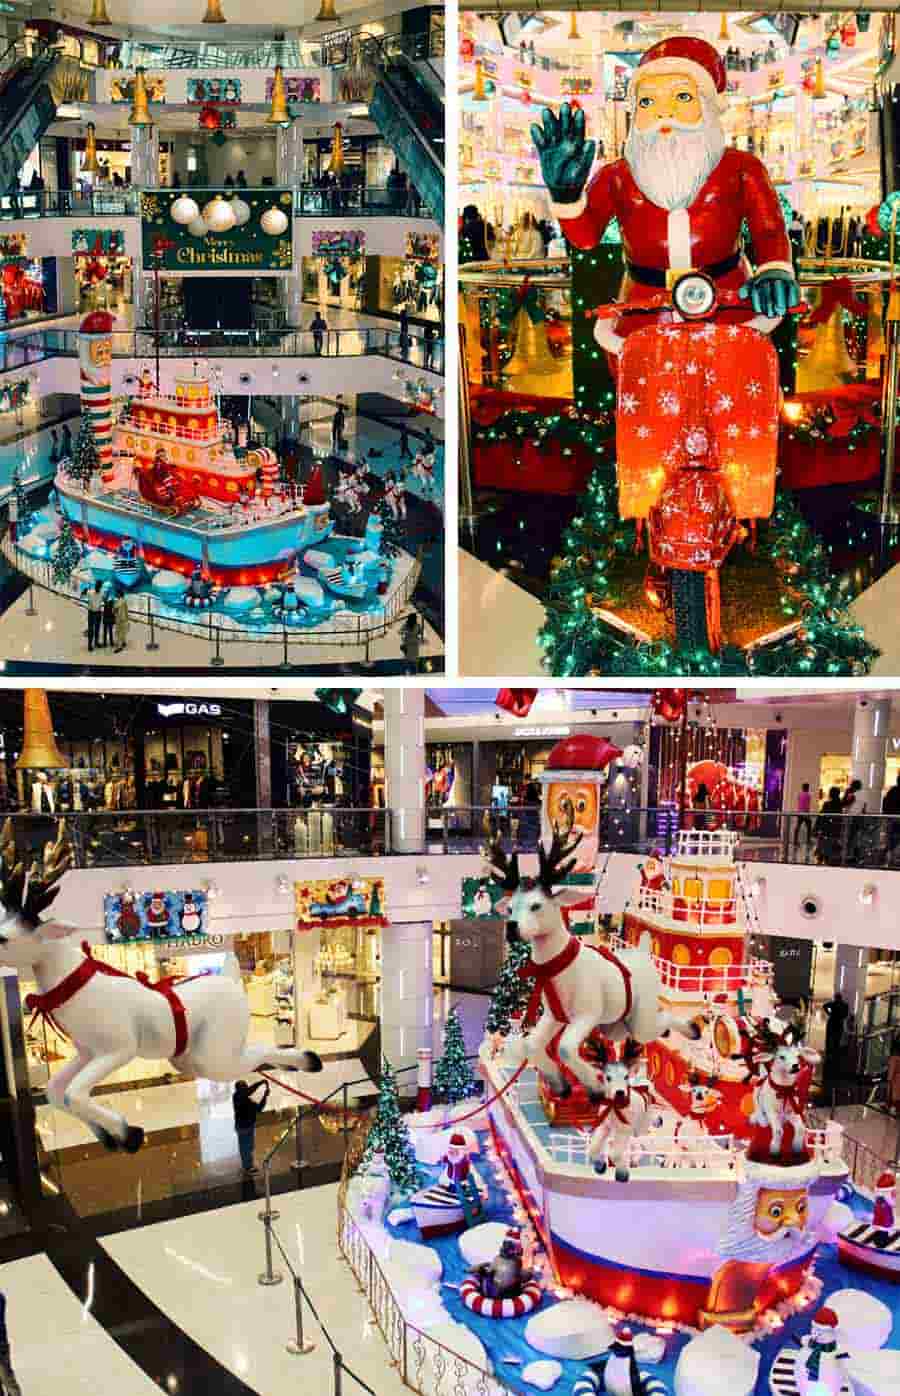 South City Mall steps into the Yuletide spirit with Christmas-themed decorations. Large structures of reindeers, Santa Claus, polar bears and other season-special decorations have decked the interior and exterior of the mall